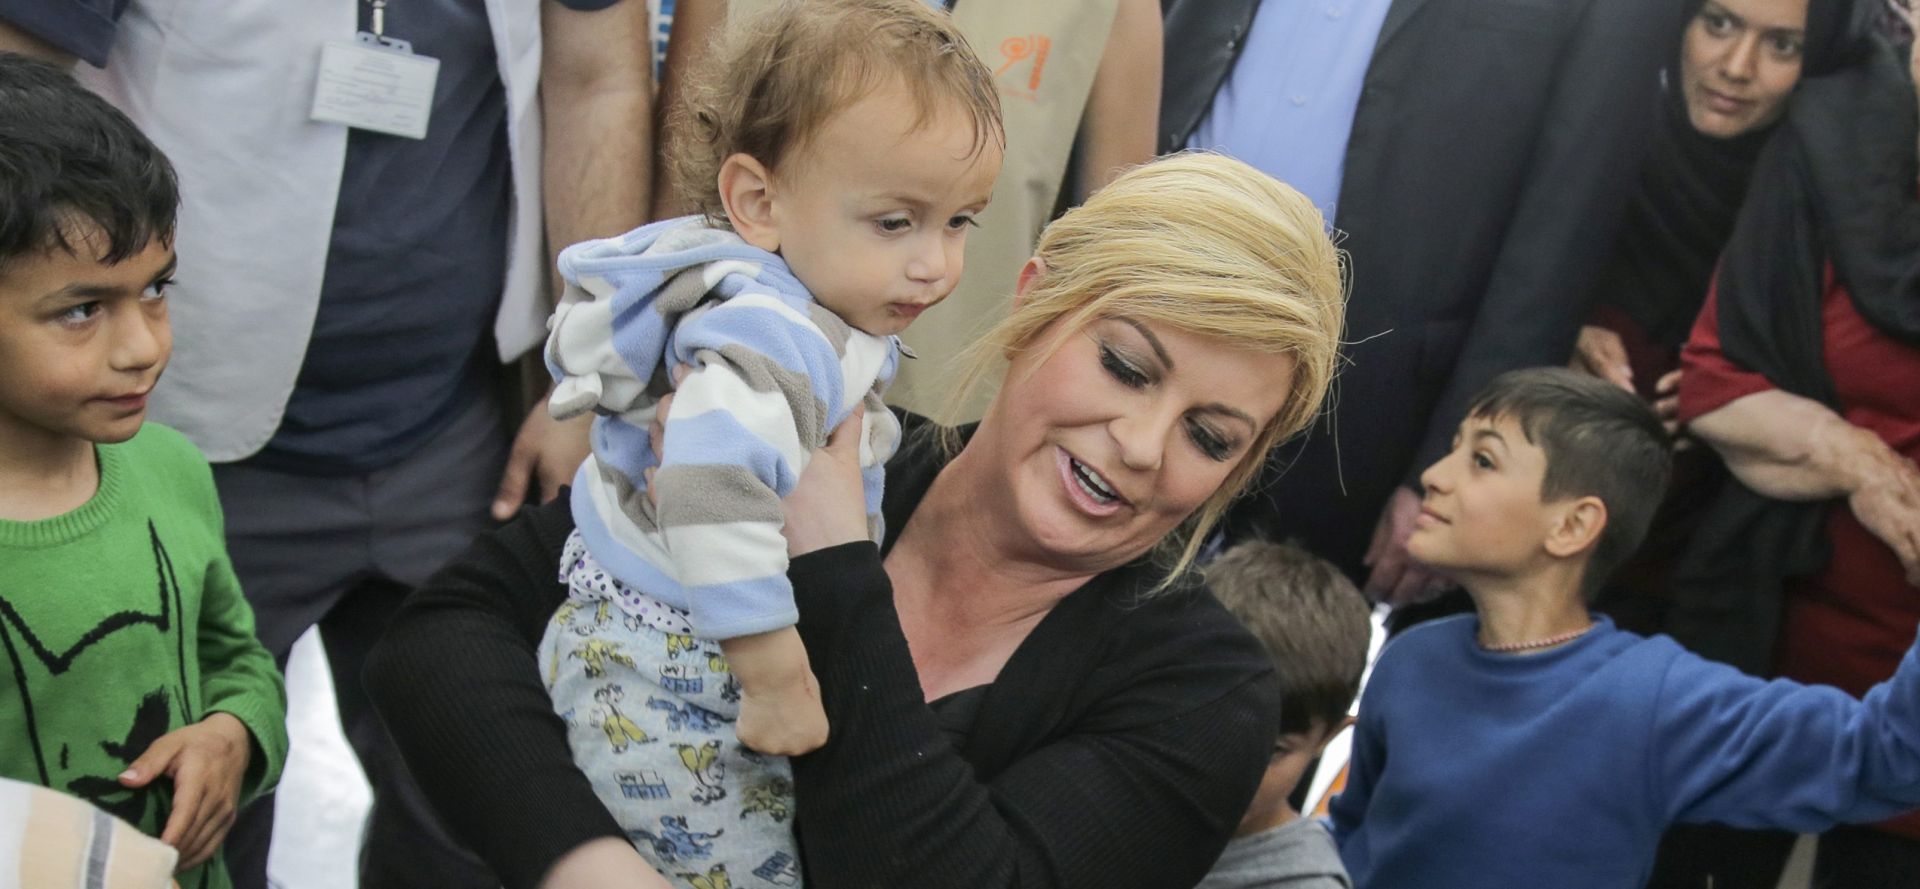 epa05256611 Croatian President Kolinda Grabar-Kitarovic (C) holds a child and talks with refugees stuck in the registration and transit camp for refugees near Gevgelia, Former Yugoslav Republic of Macedonia (FYROM), on 13 April 2016. The Macedonian, Slovenian and Croatian Presidents are on a two days work visit to Macedonia to gather first hand information about the refugee situation at the border to Greece.  EPA/VALDRIN XHEMAJ